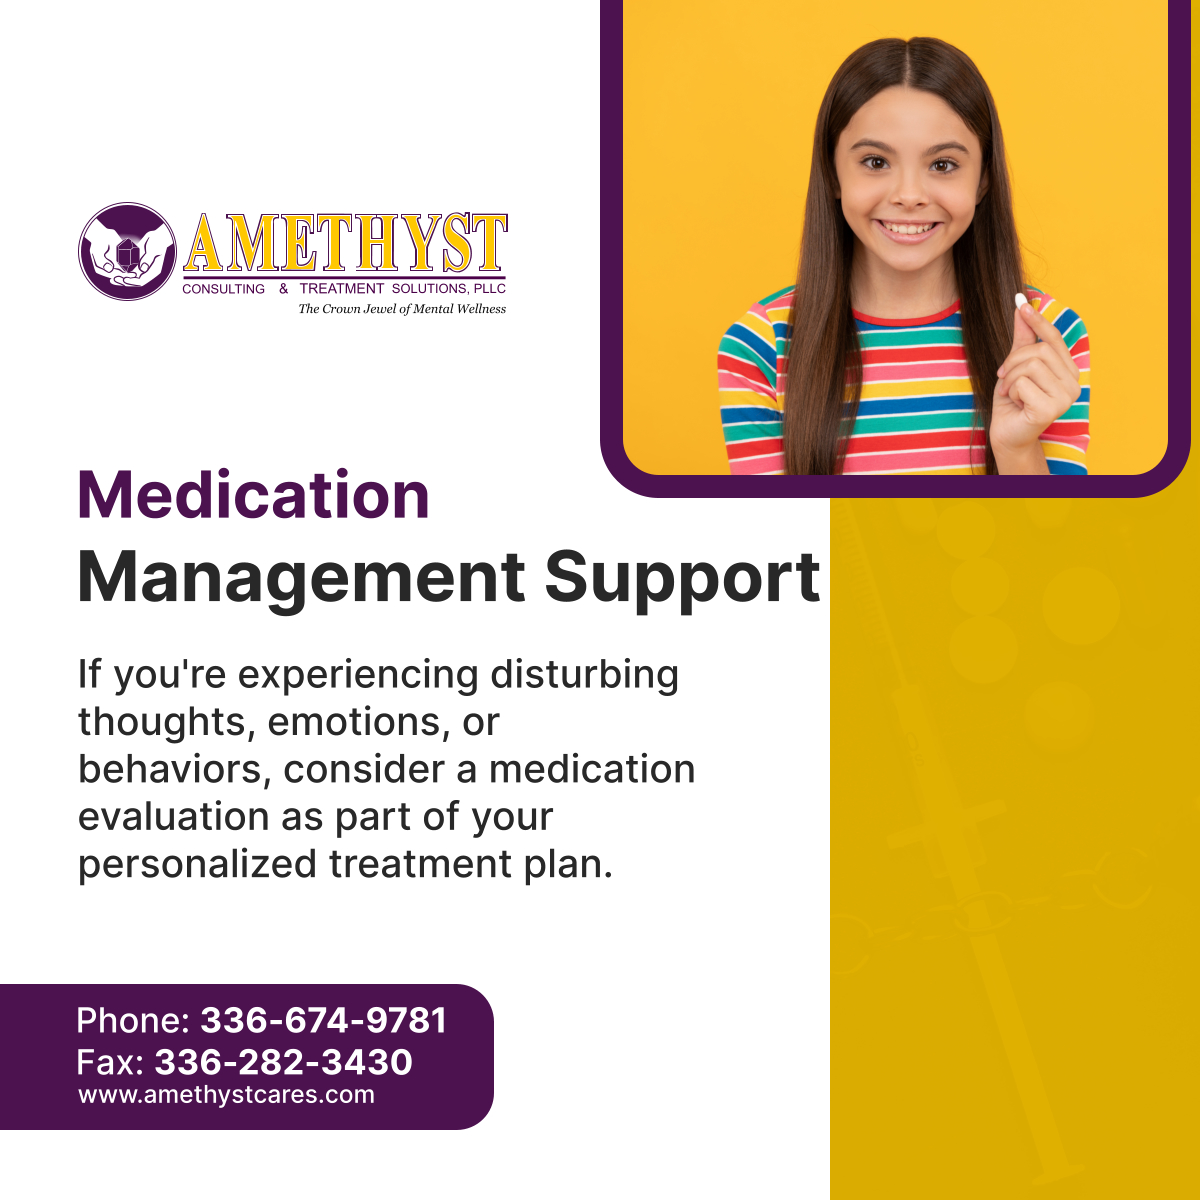 Prioritize your mental health. Explore the benefits of Medication Management Support. 

#GreensboroNC #Psychotherapy #MedicationSupport